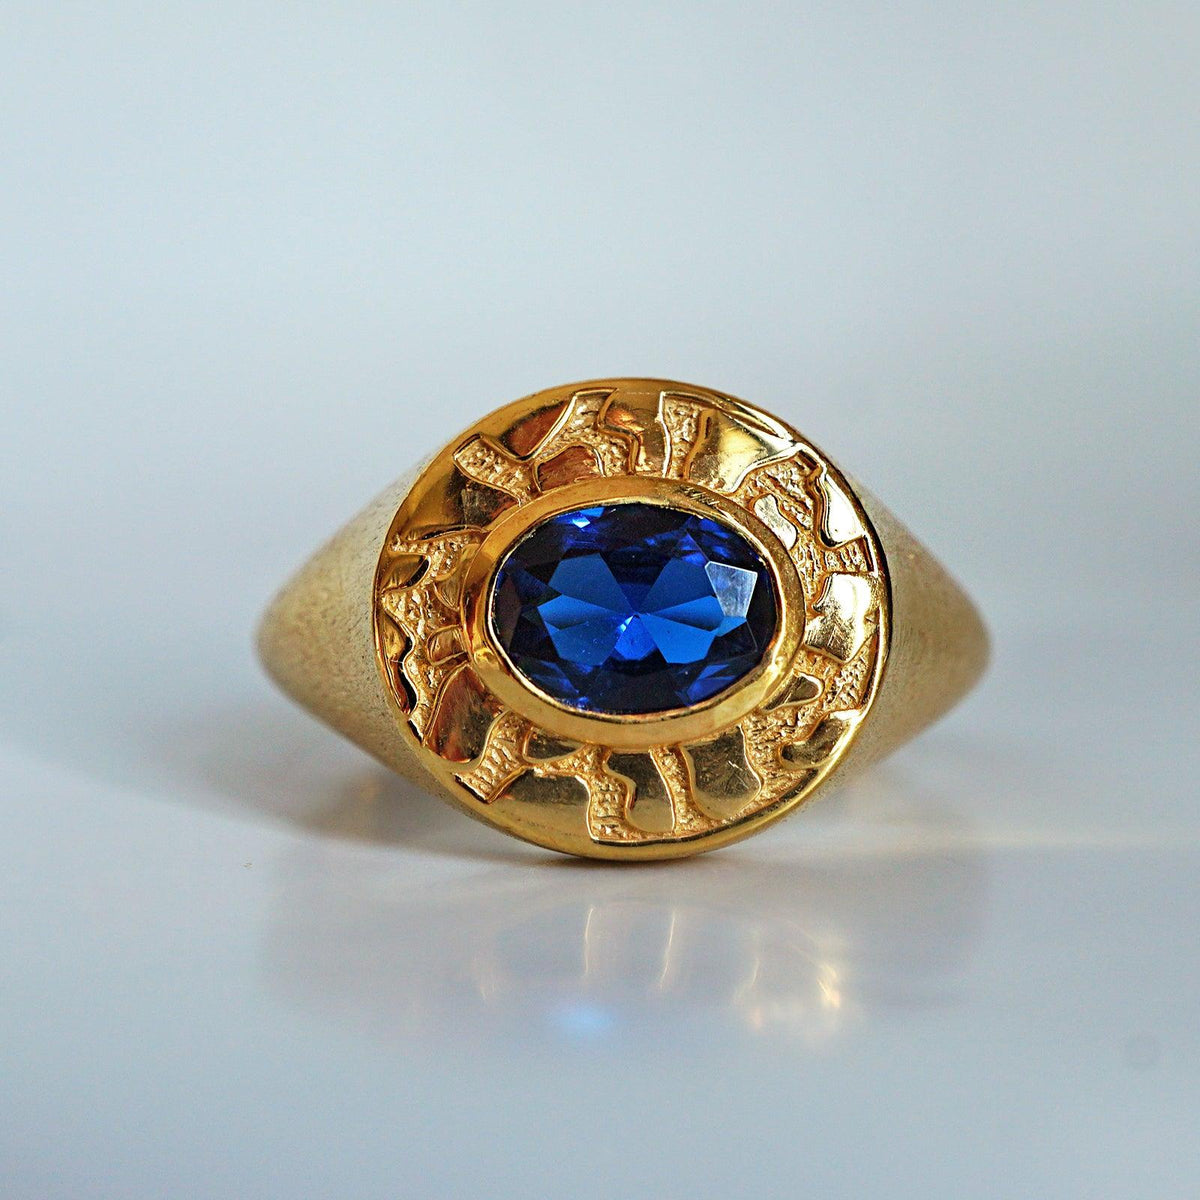 Blue Sapphire Rock Signet Ring in Sterling Silver and 14K Gold